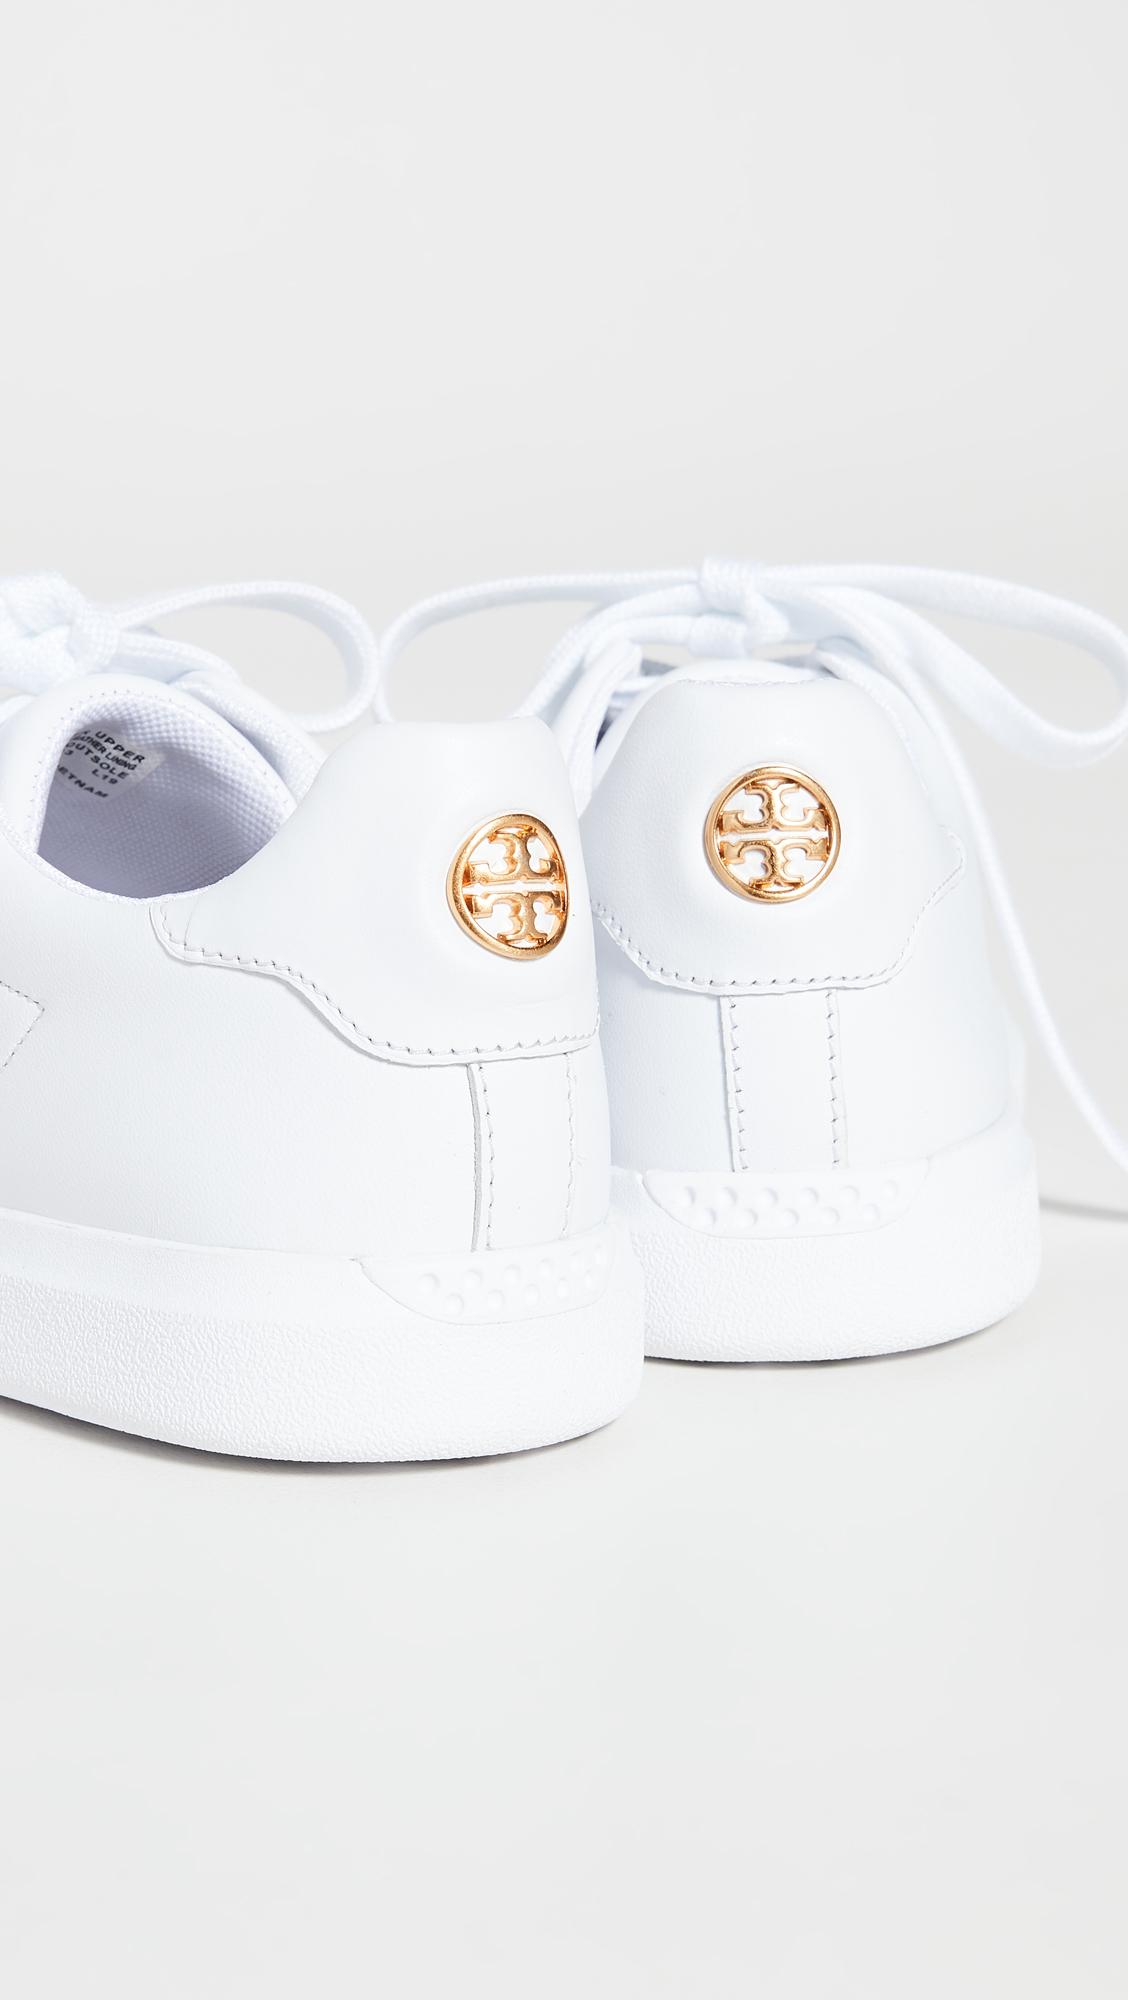 Tory Burch Howell Court Sneakers in White | Lyst